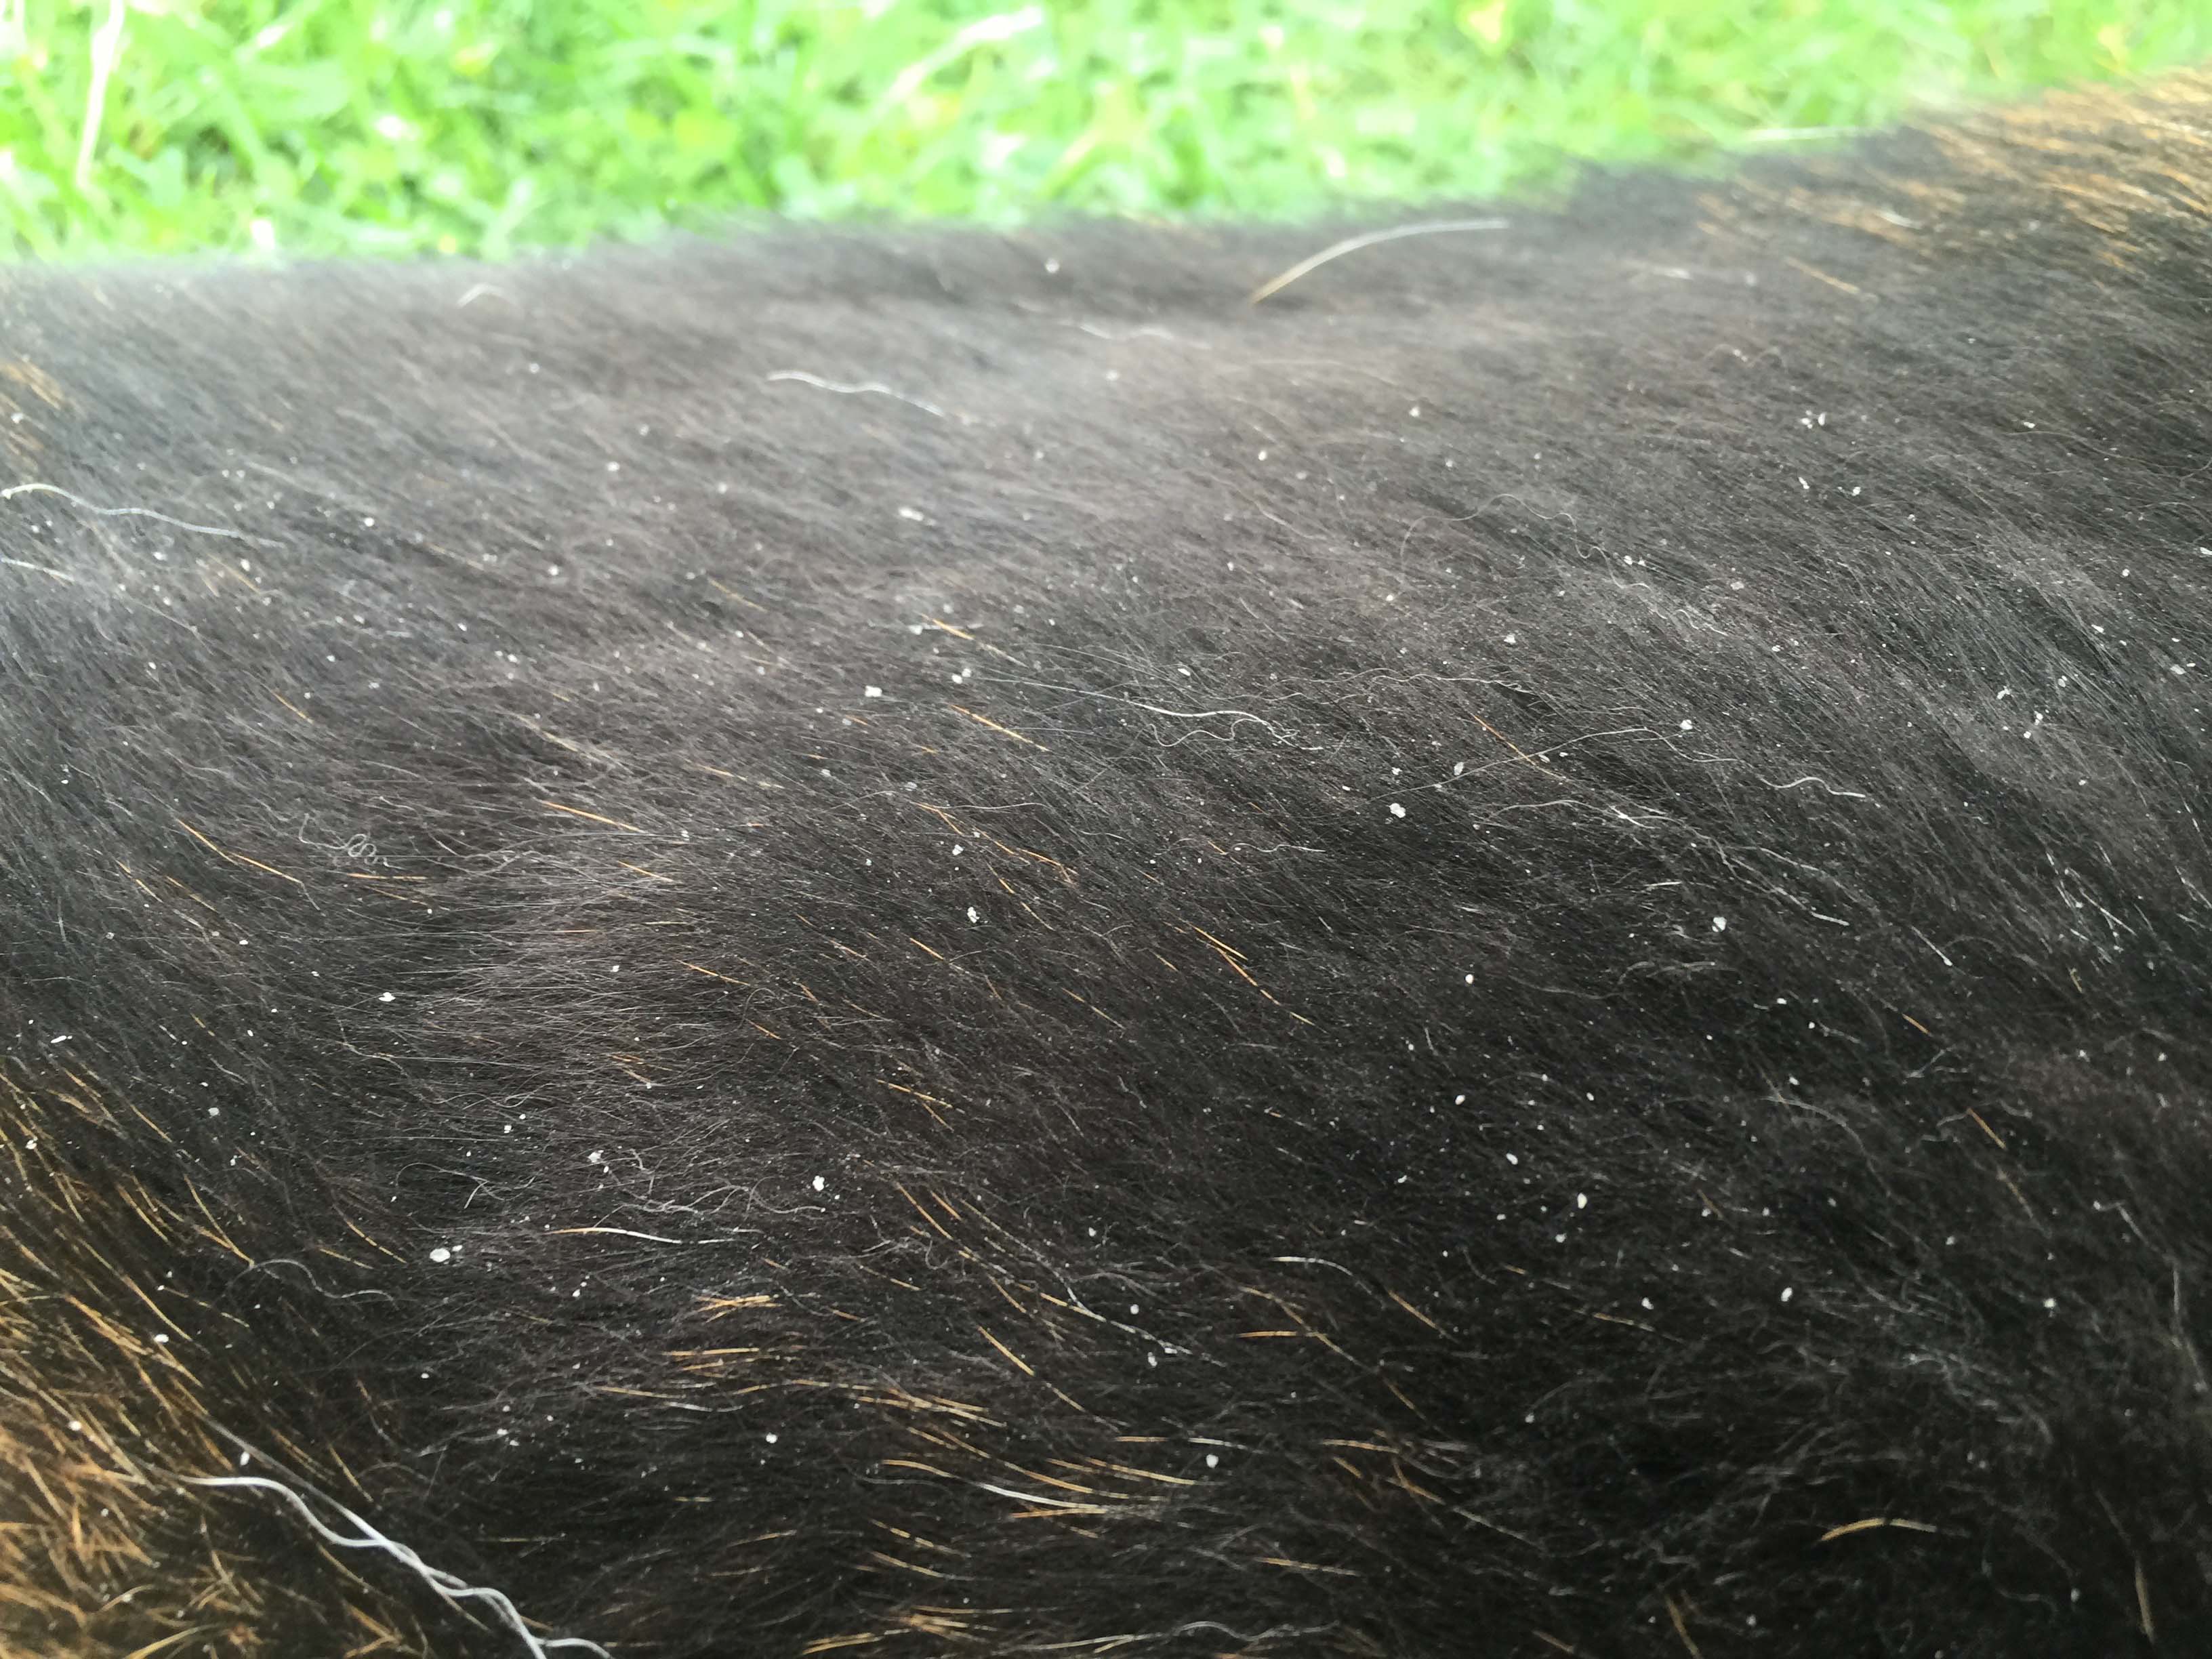 Dog Dandruff. Treatment That Works in 1 Day